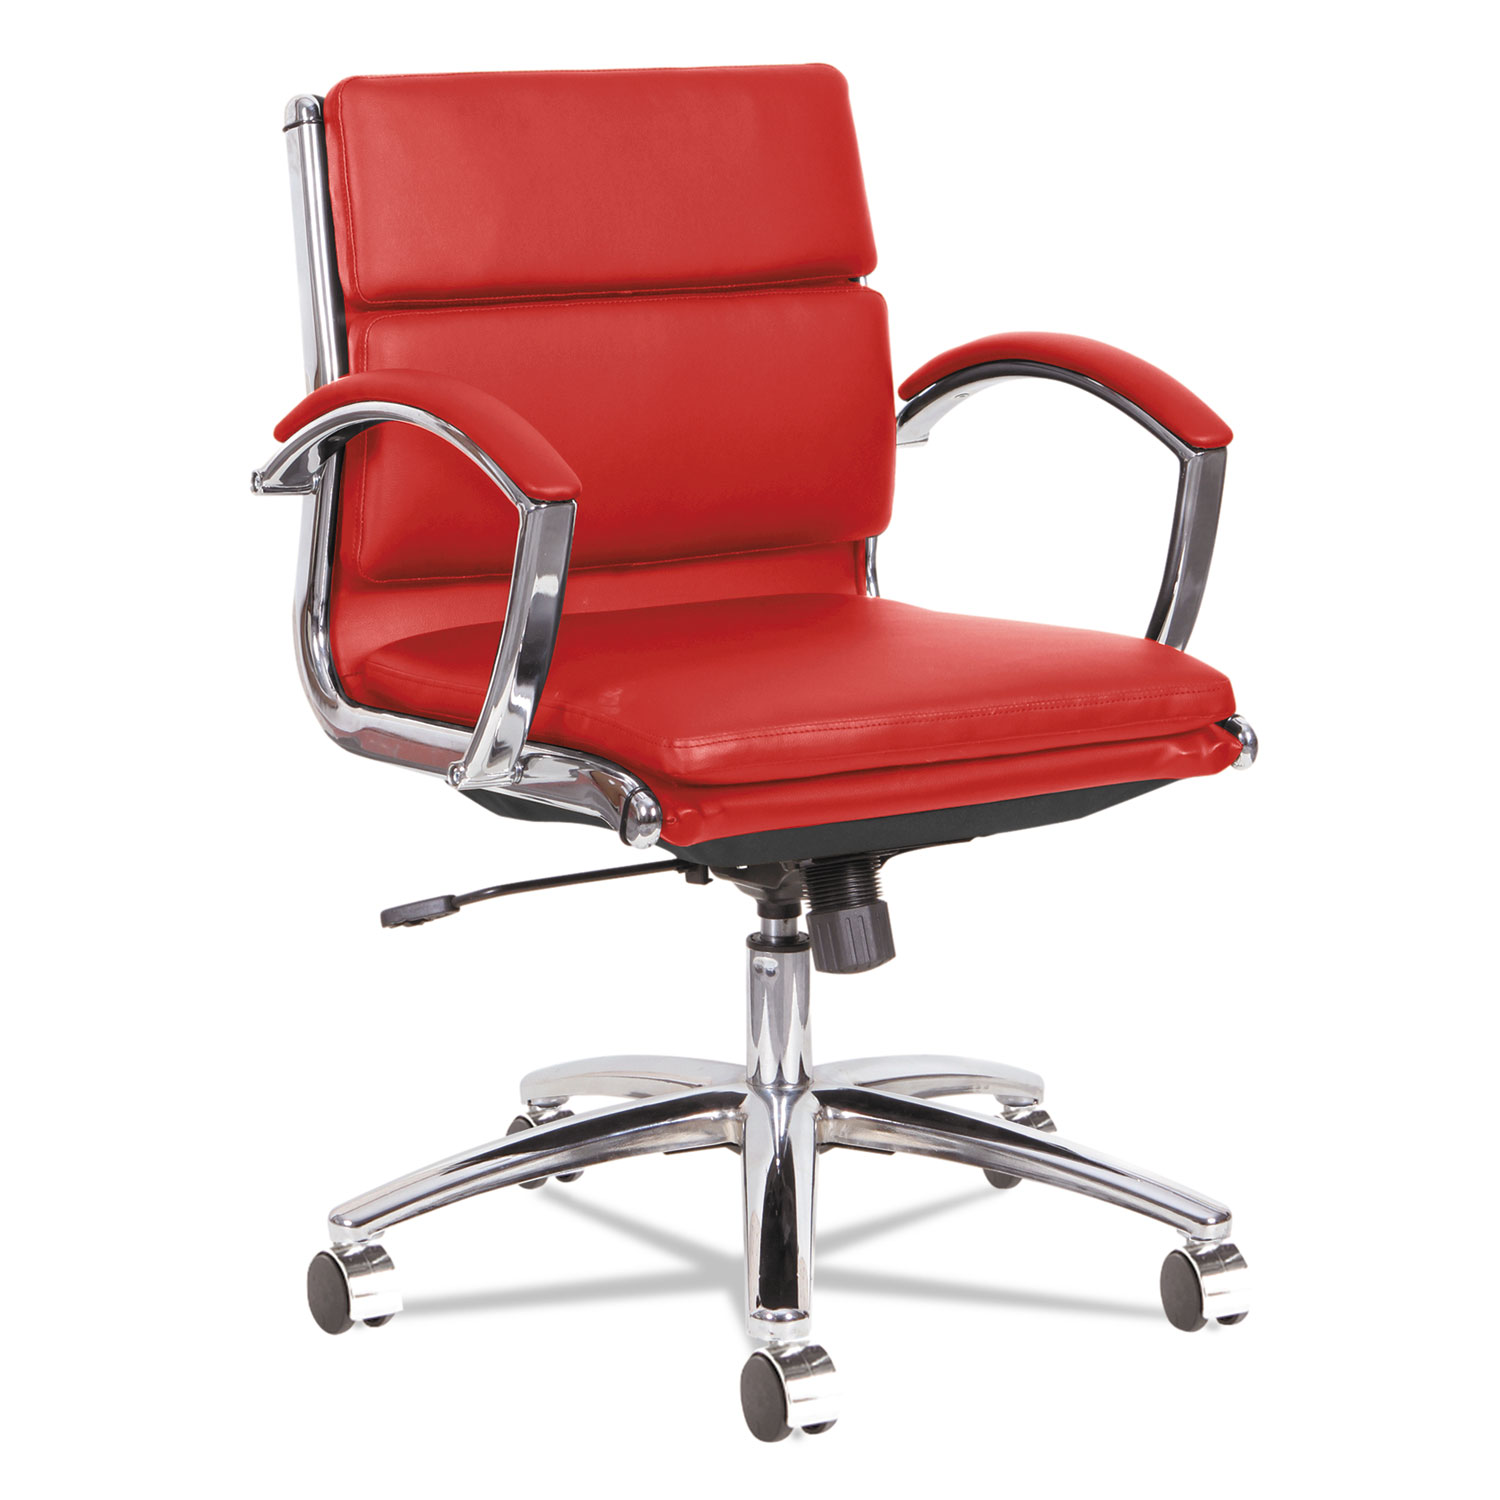  Alera ALENR4739 Alera Neratoli Low-Back Slim Profile Chair, Supports up to 275 lbs., Red Seat/Red Back, Chrome Base (ALENR4739) 